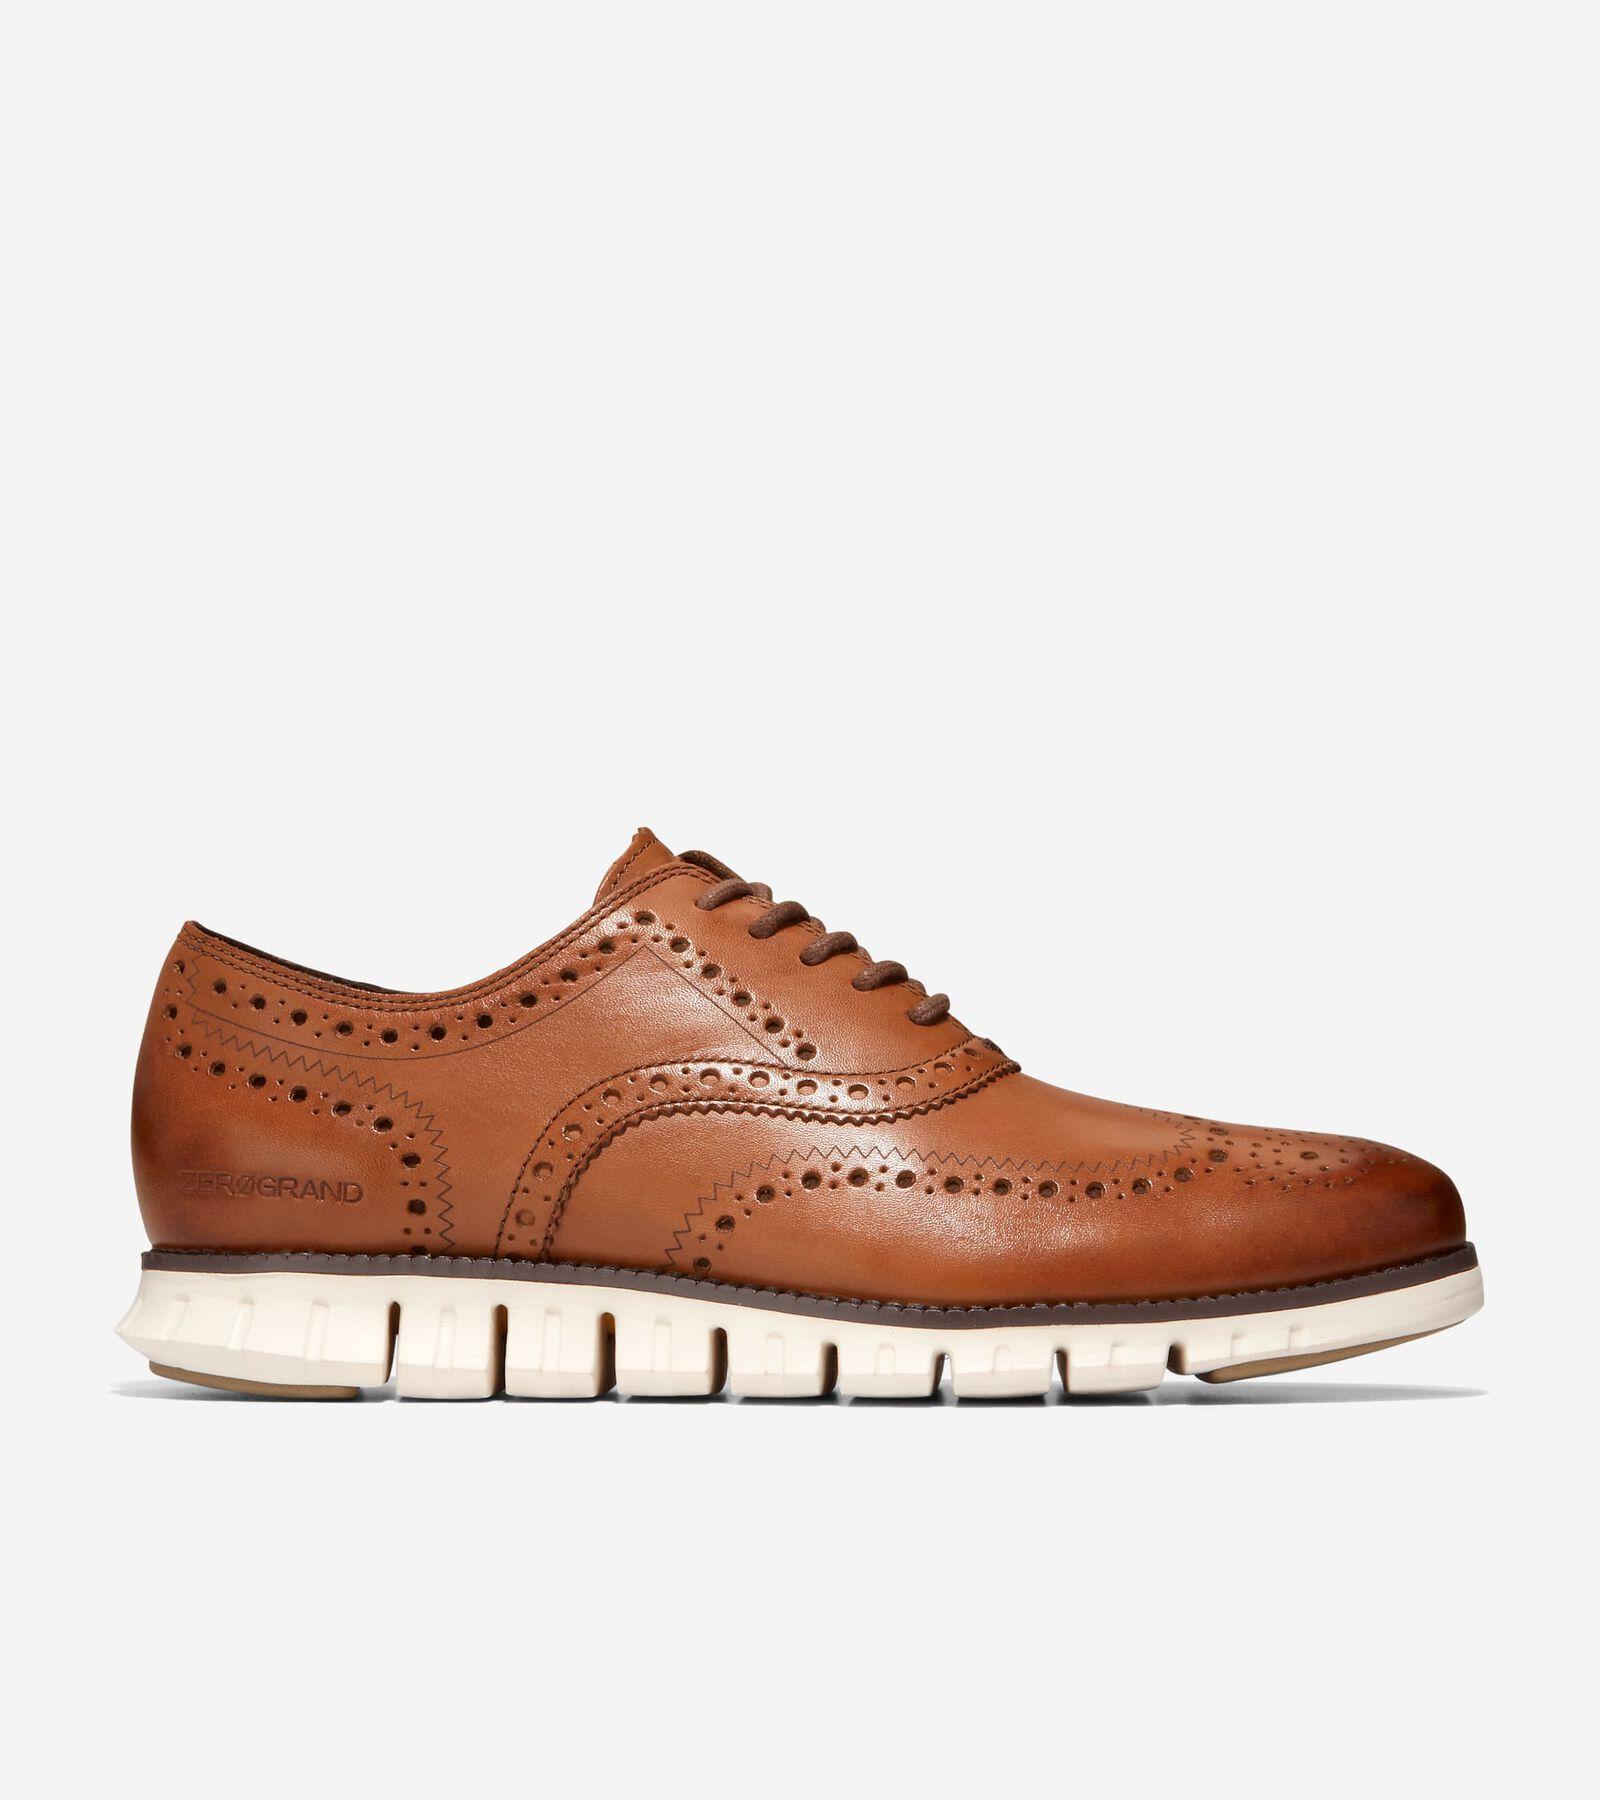 Mens ZeroGrand Leather Wingtip Oxfords Product Image